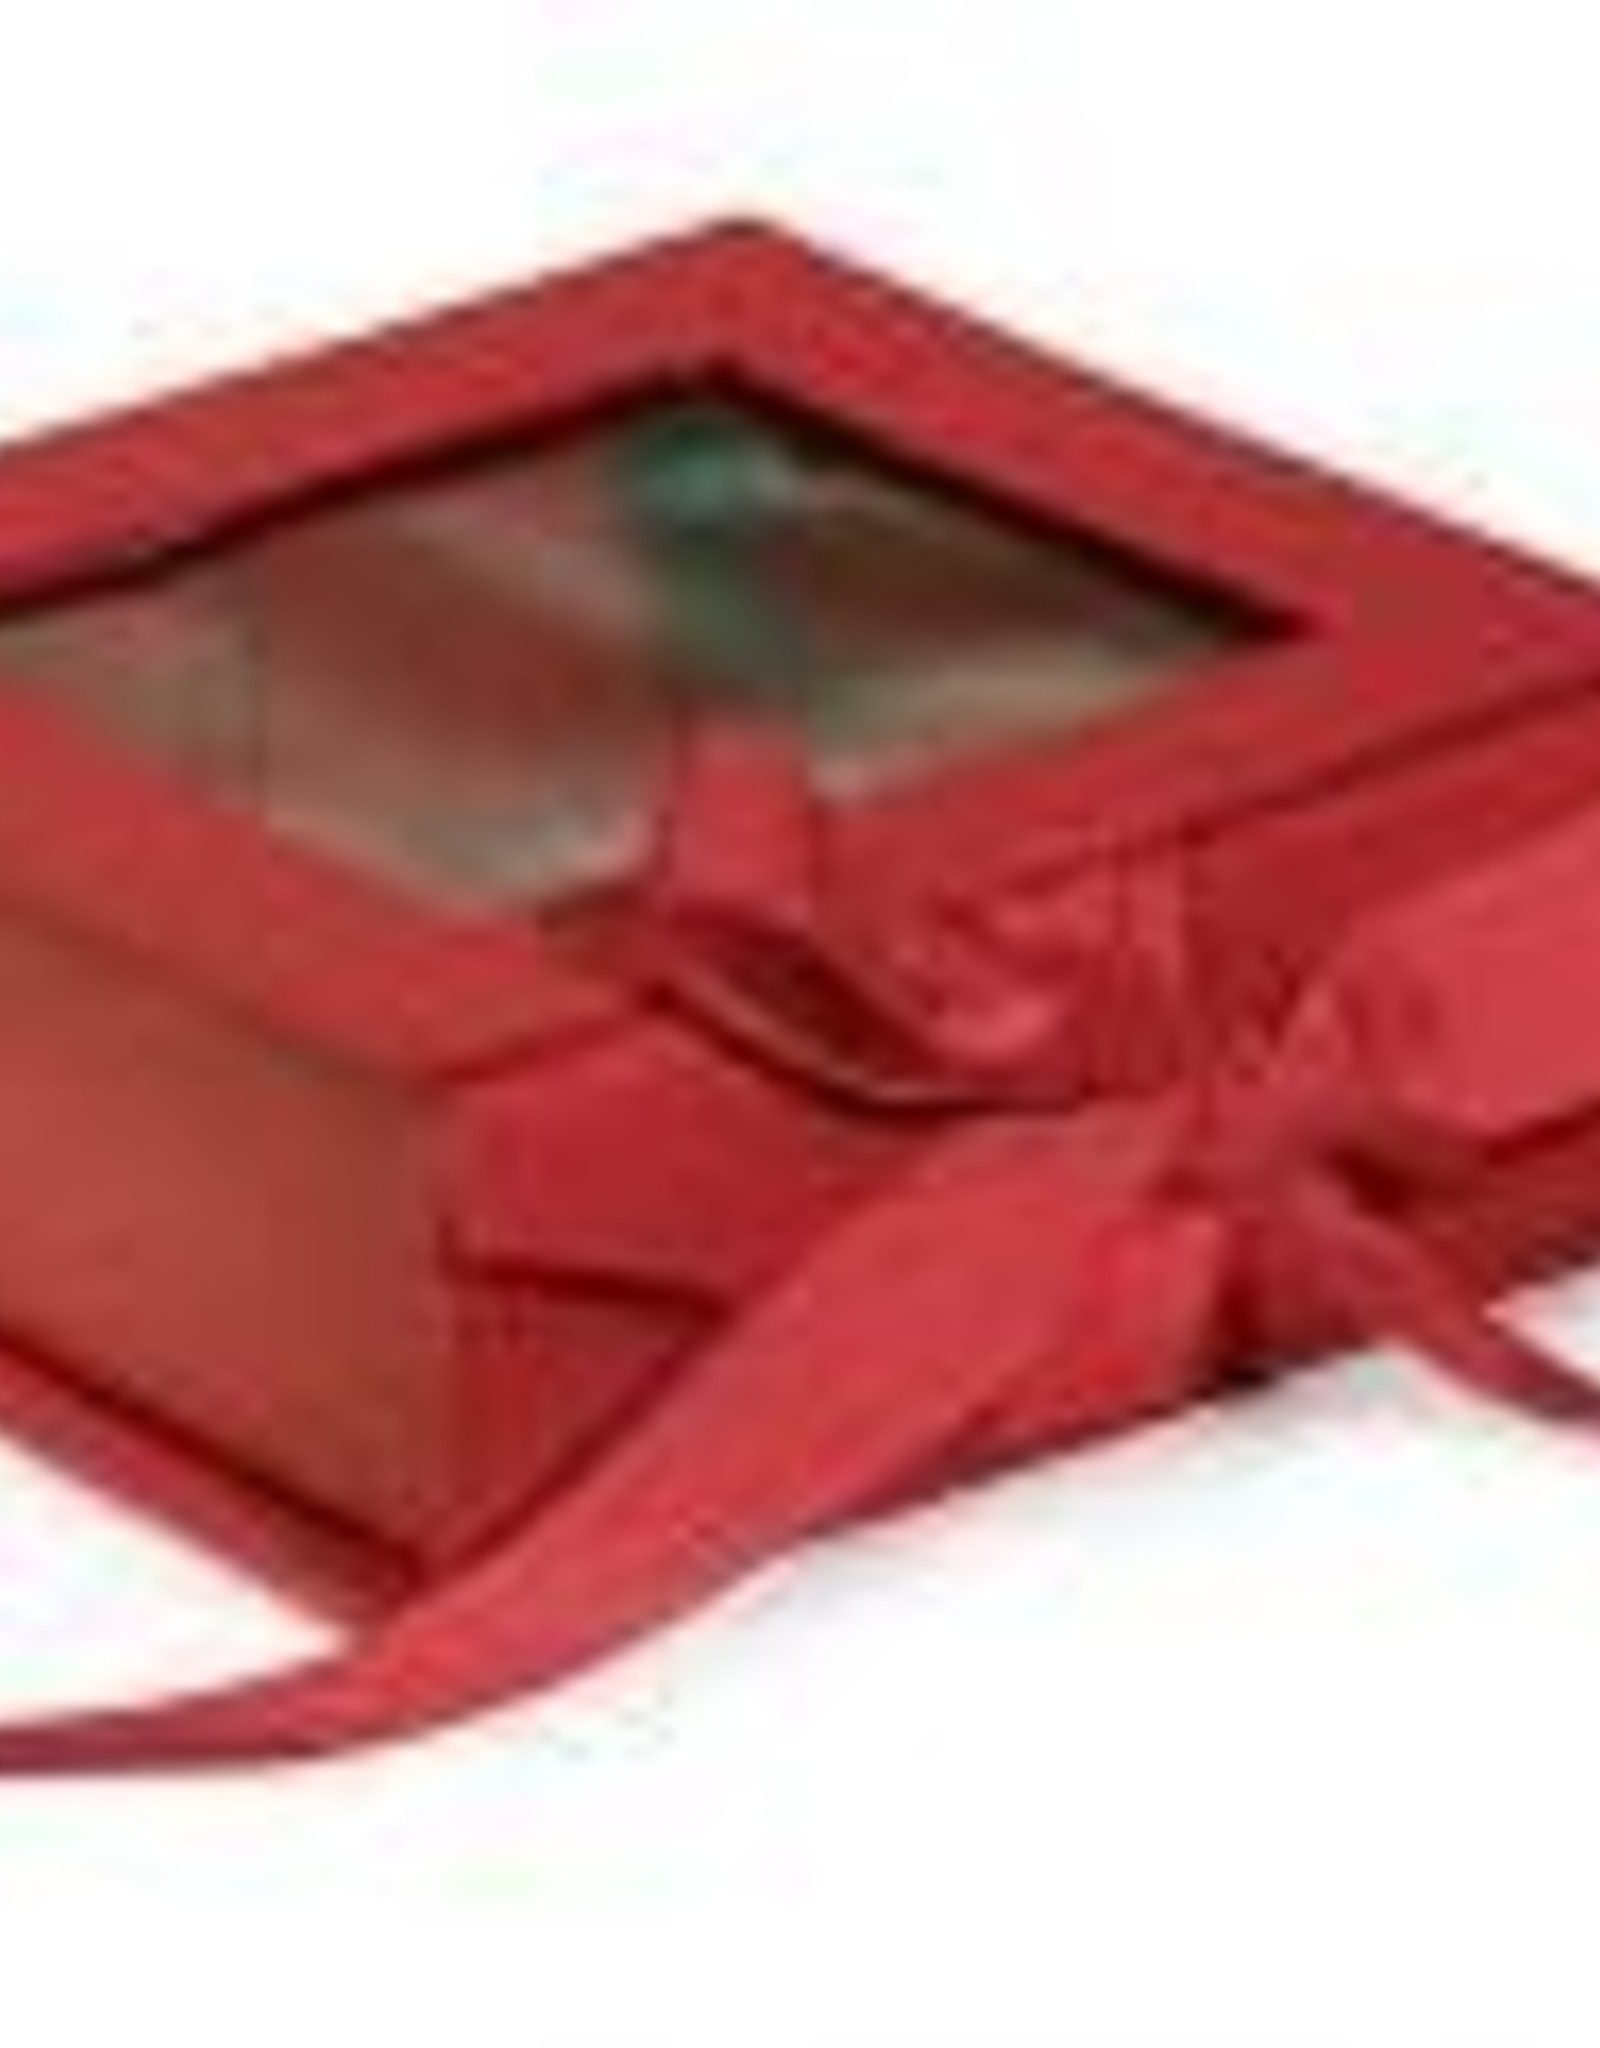 Red Folding Box with Window and Ribbon